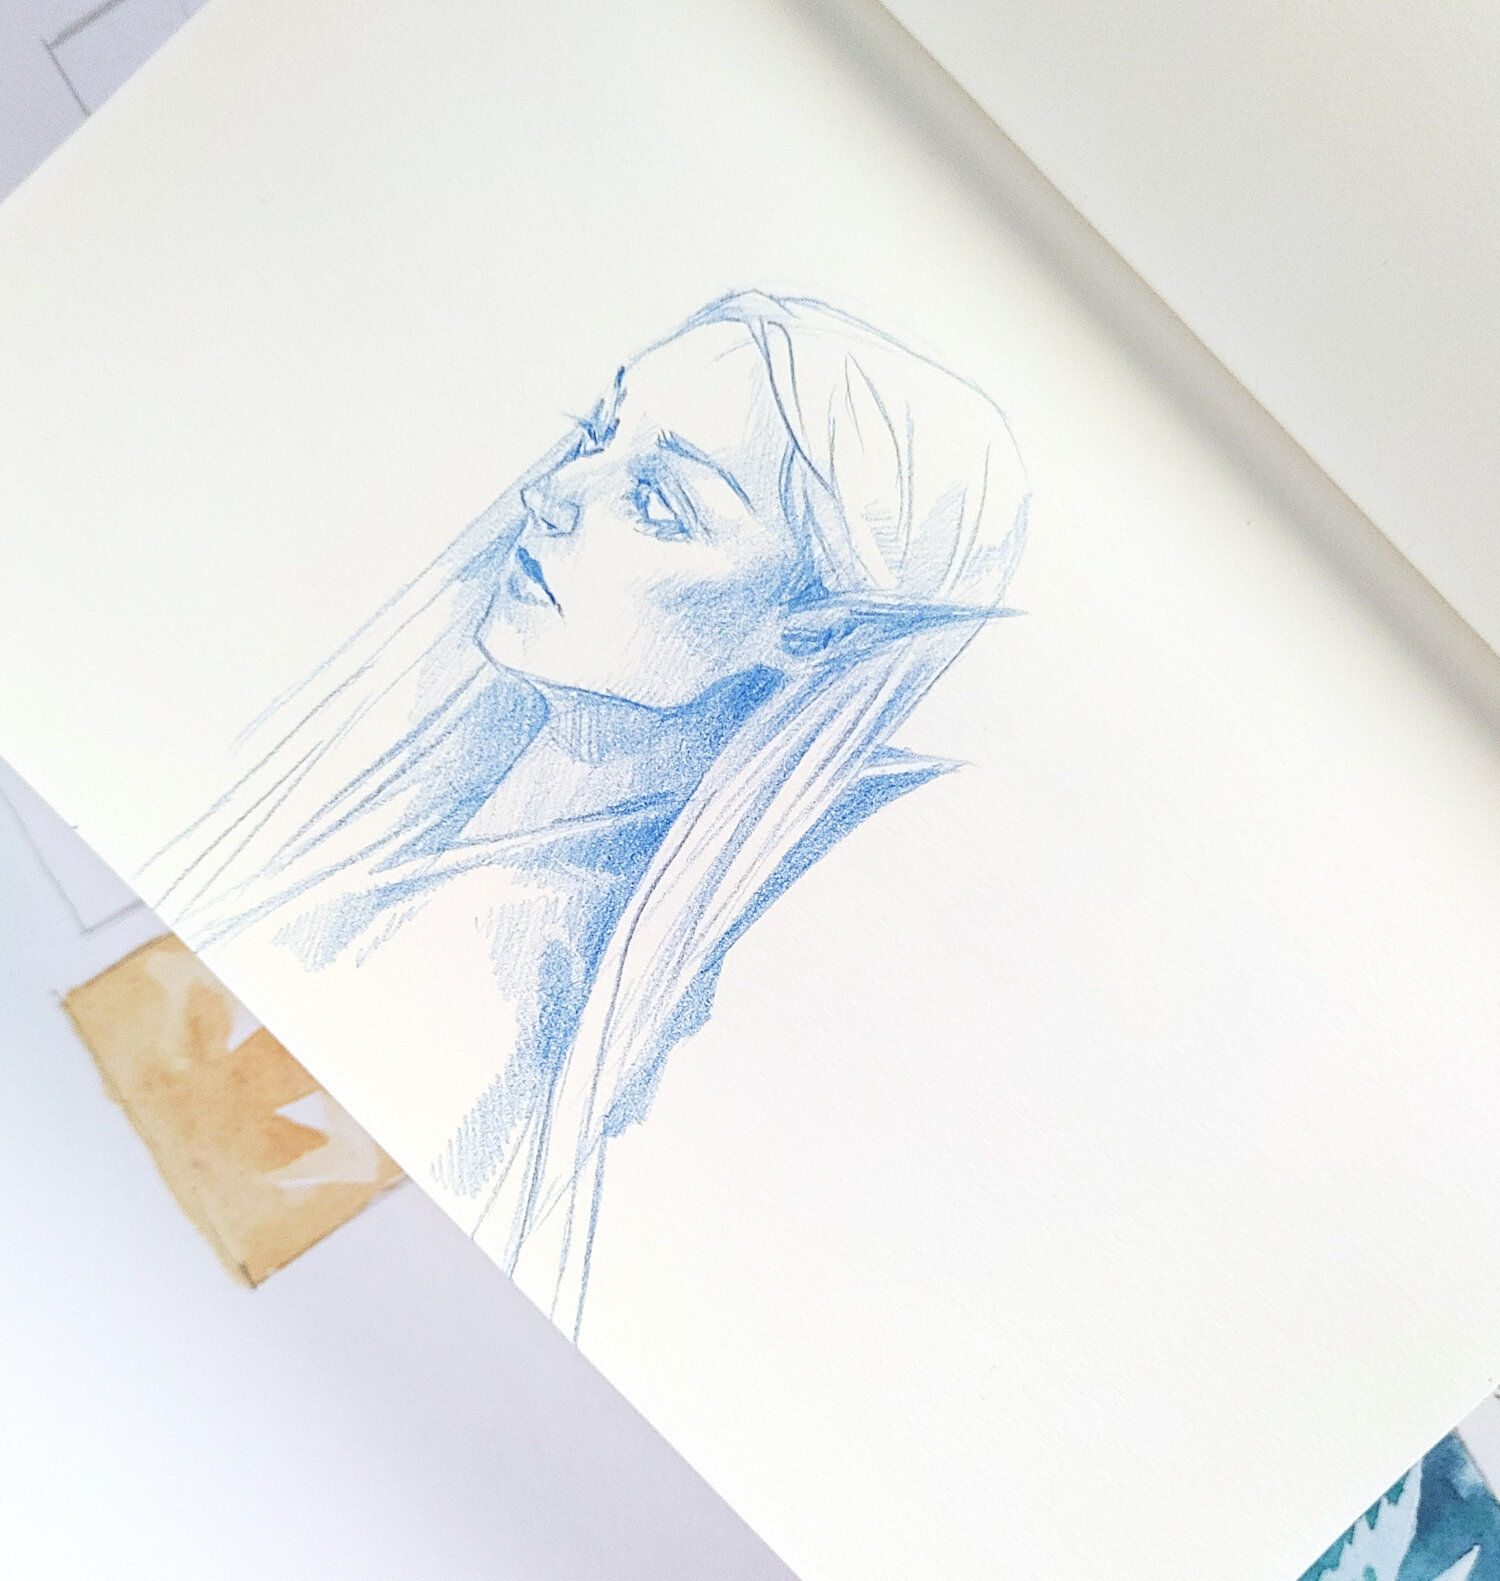 A Peek In My Sketchbook: Adding Color With Colored Pencils